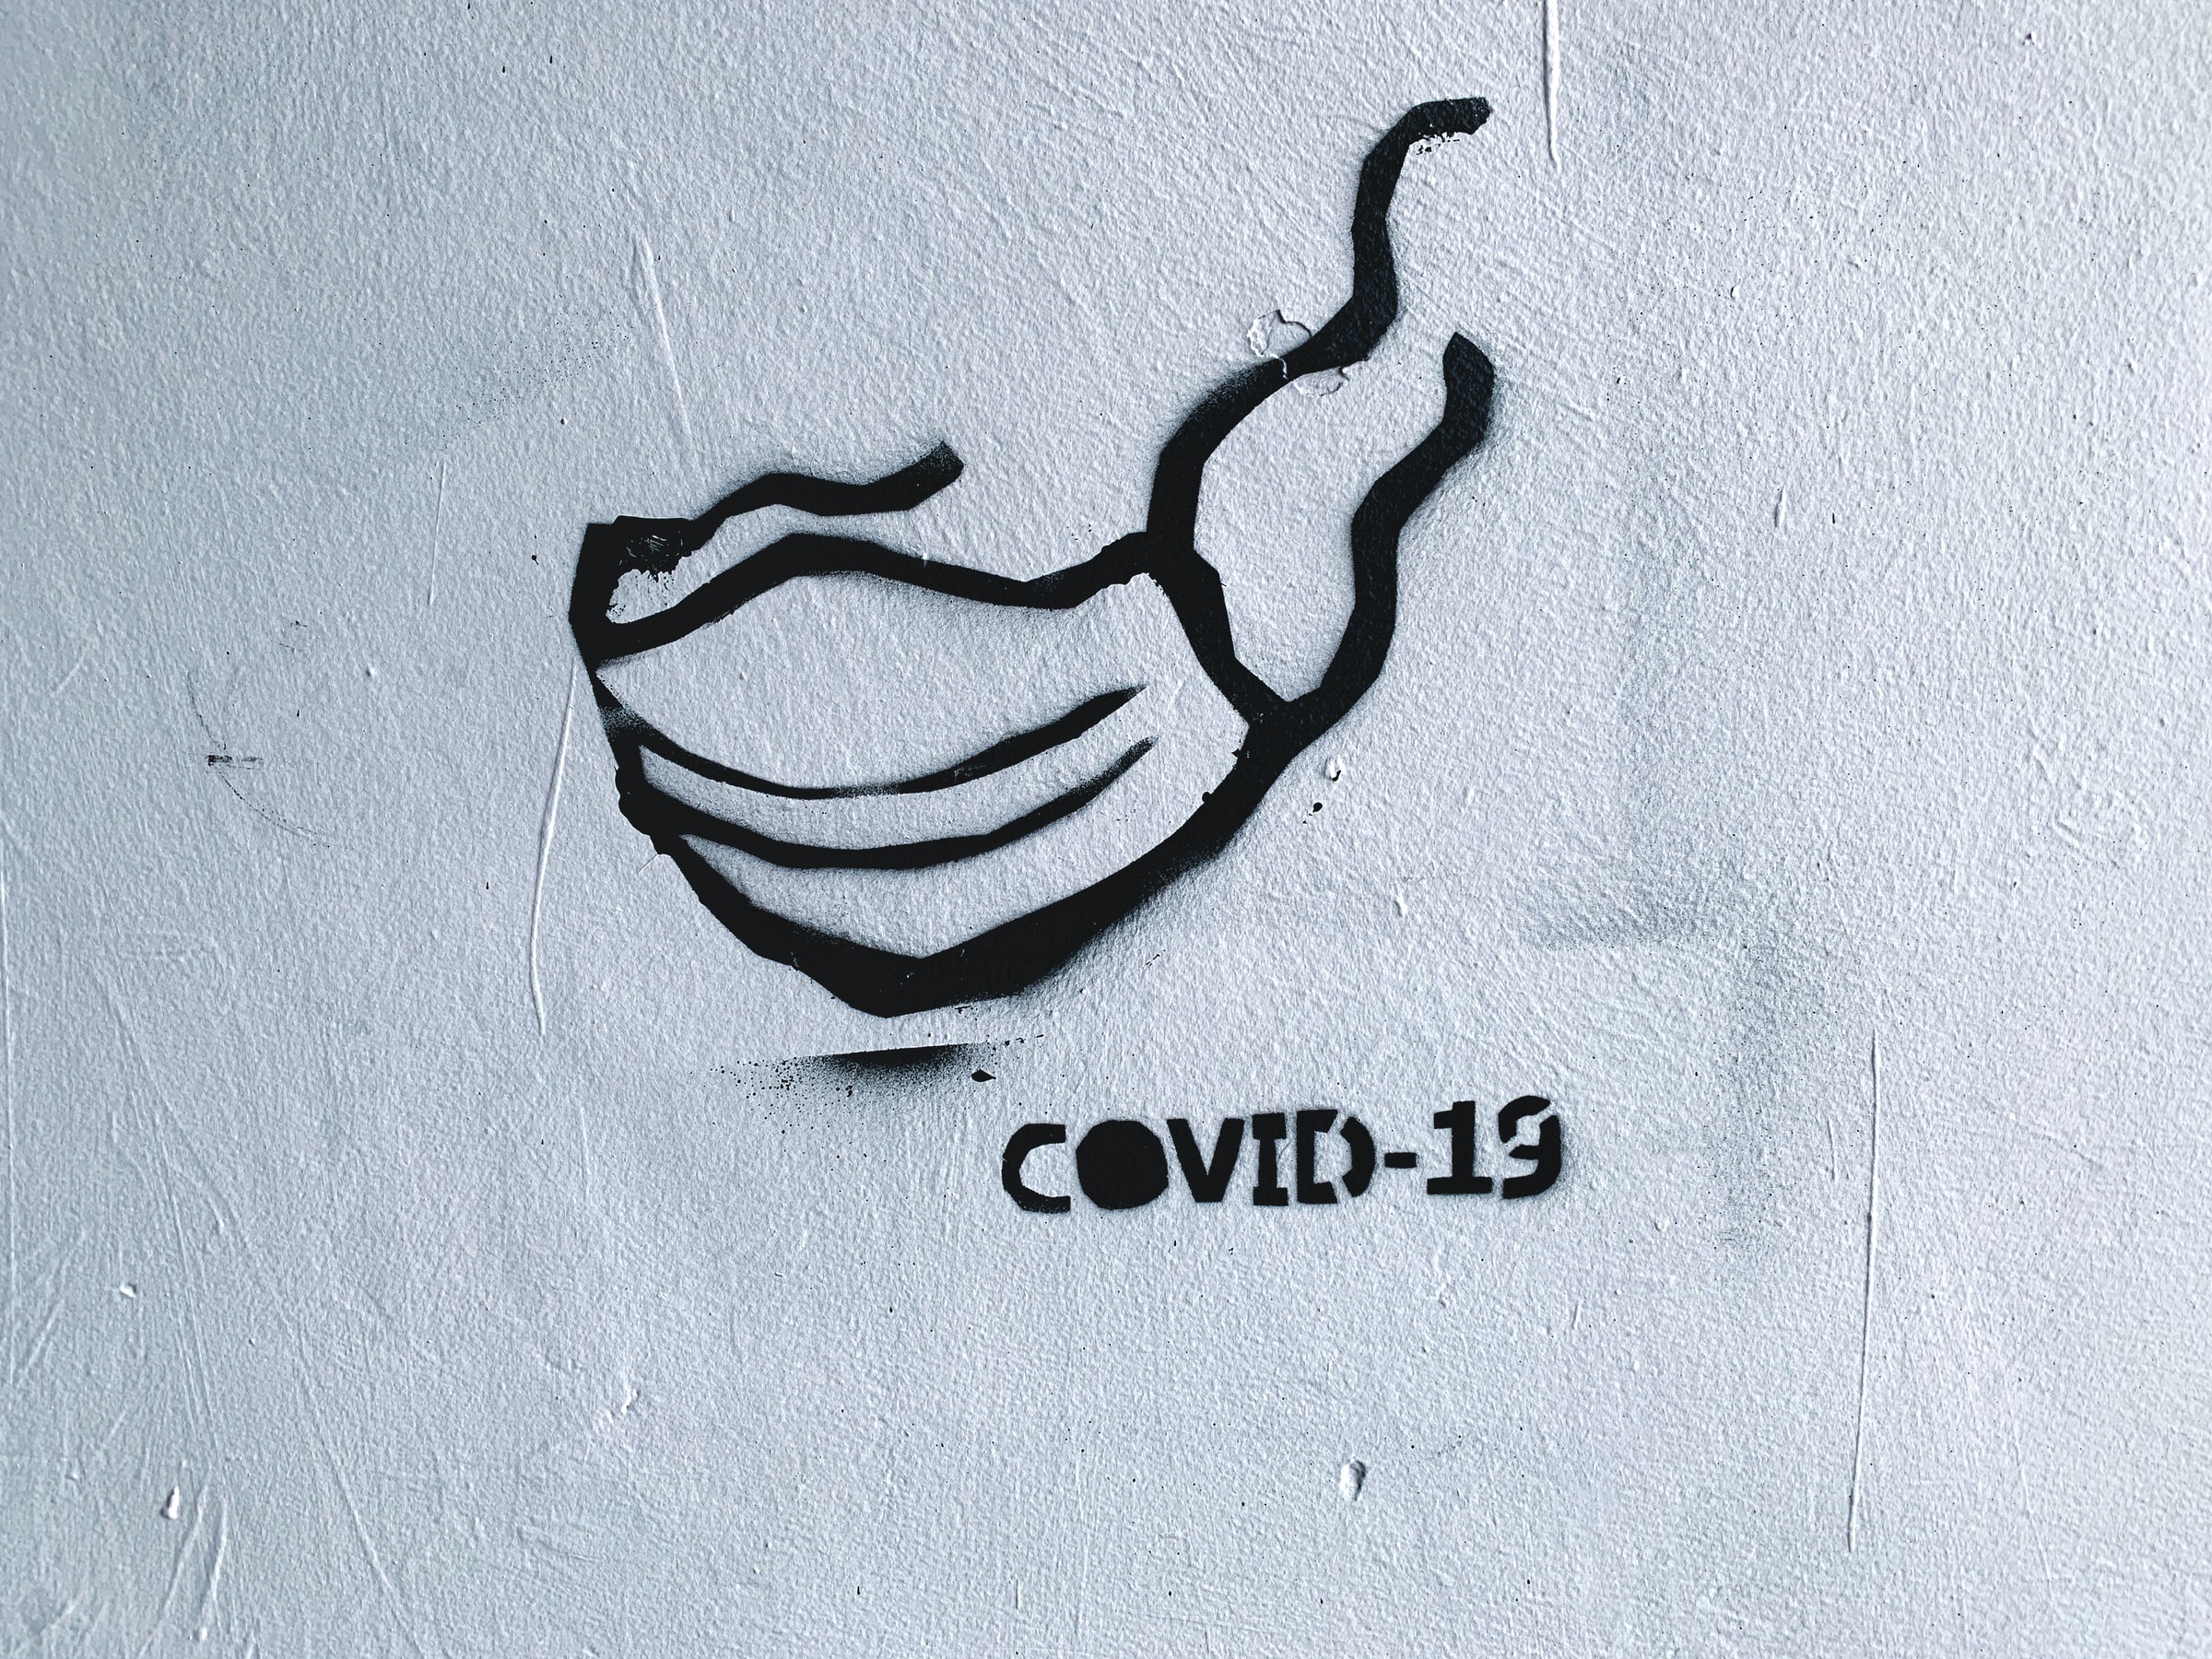 Documenting the Personal Experiences of a Community During COVID-19